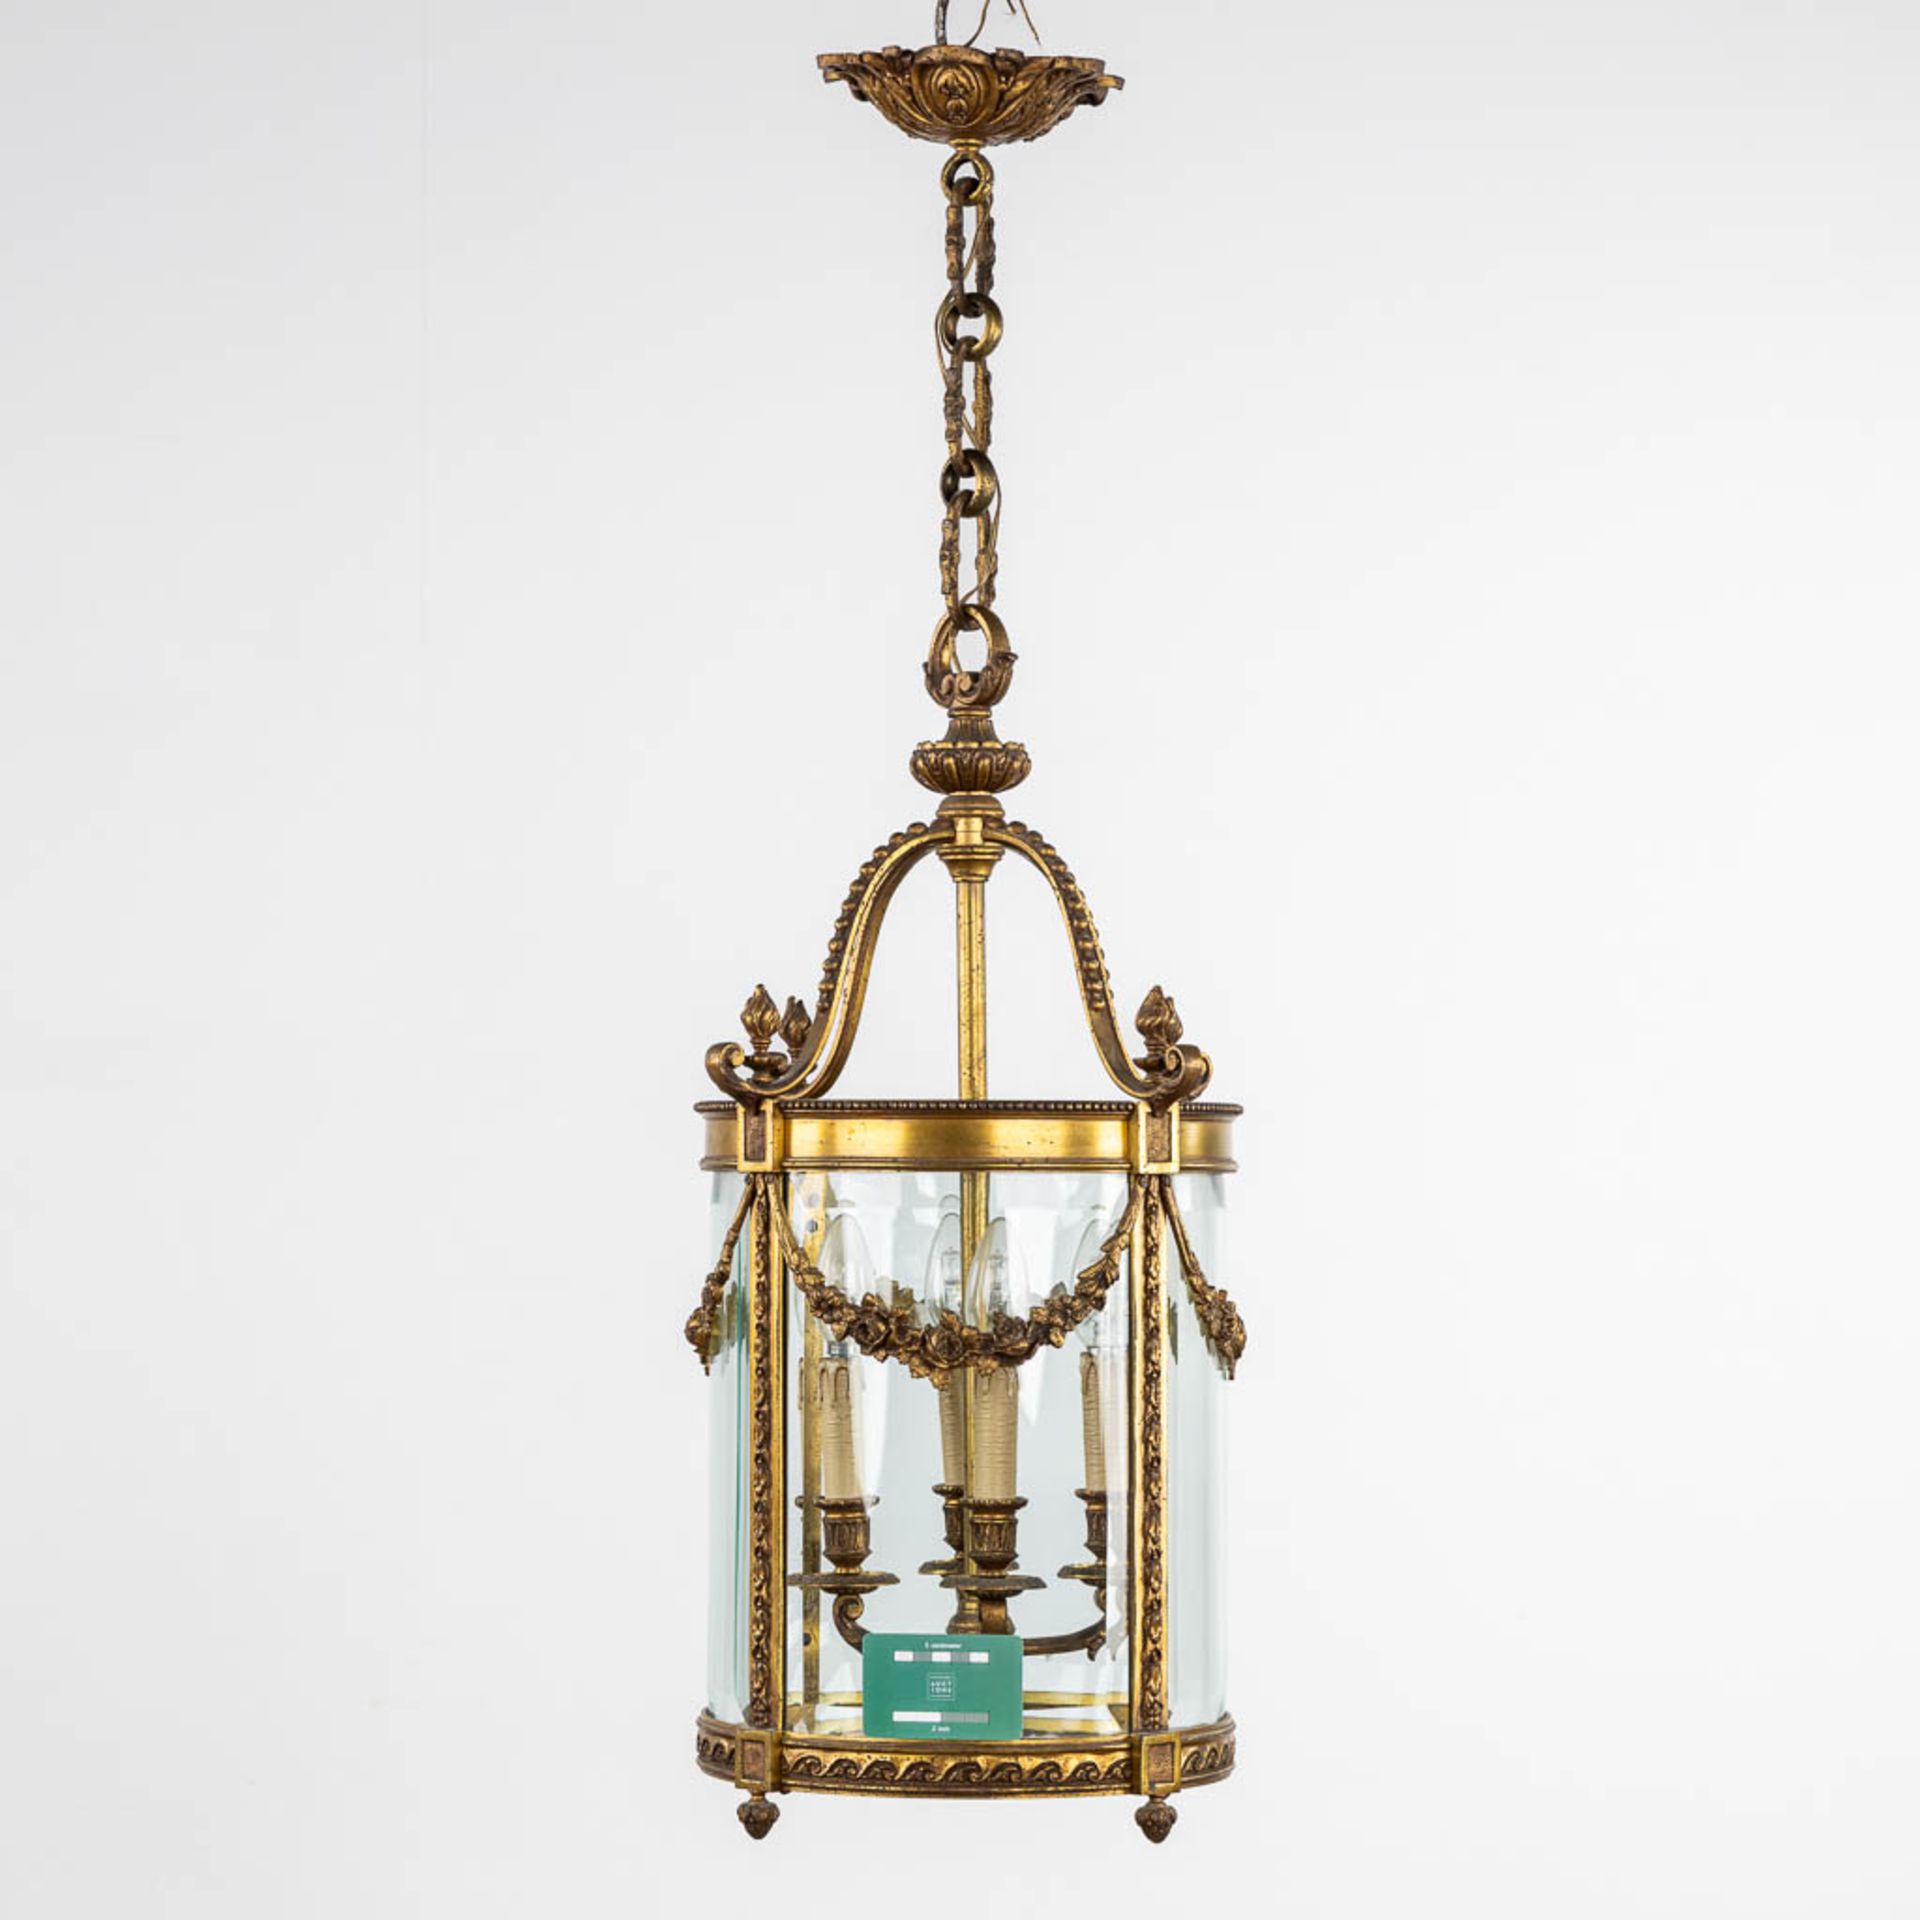 A lantern, brass and glass in Louis XVI style. (H:68 x D:37 cm) - Image 2 of 11